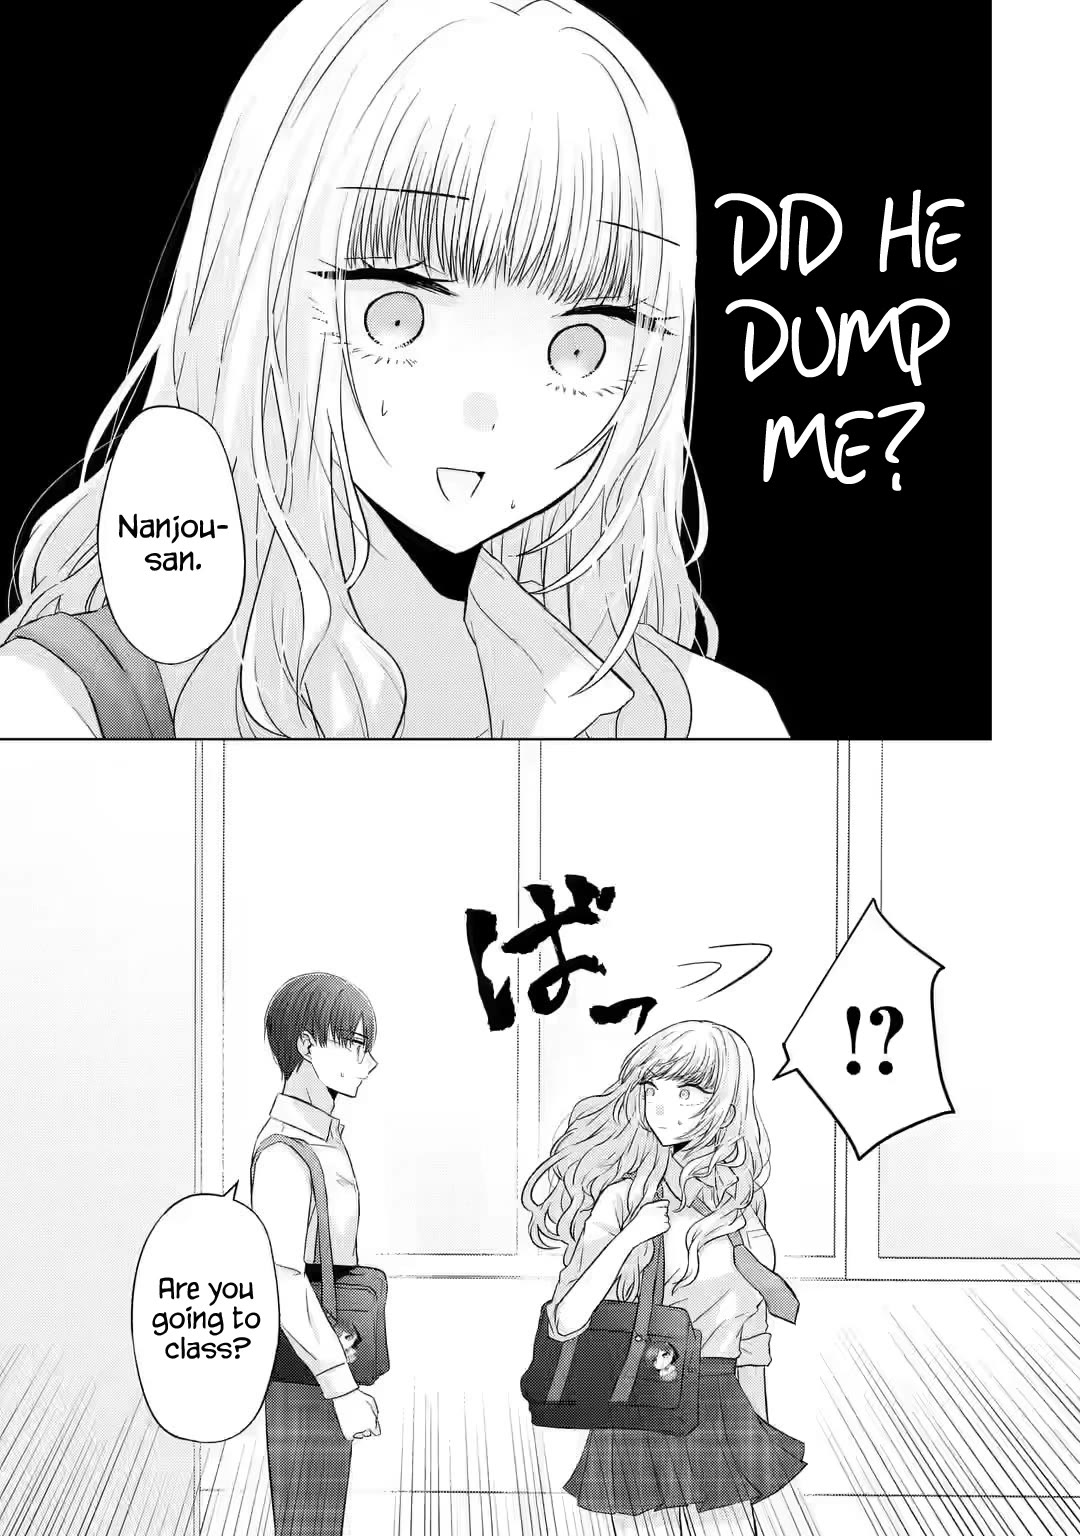 Nanjou-san Wants to Be Held by Me - chapter 5 - #6